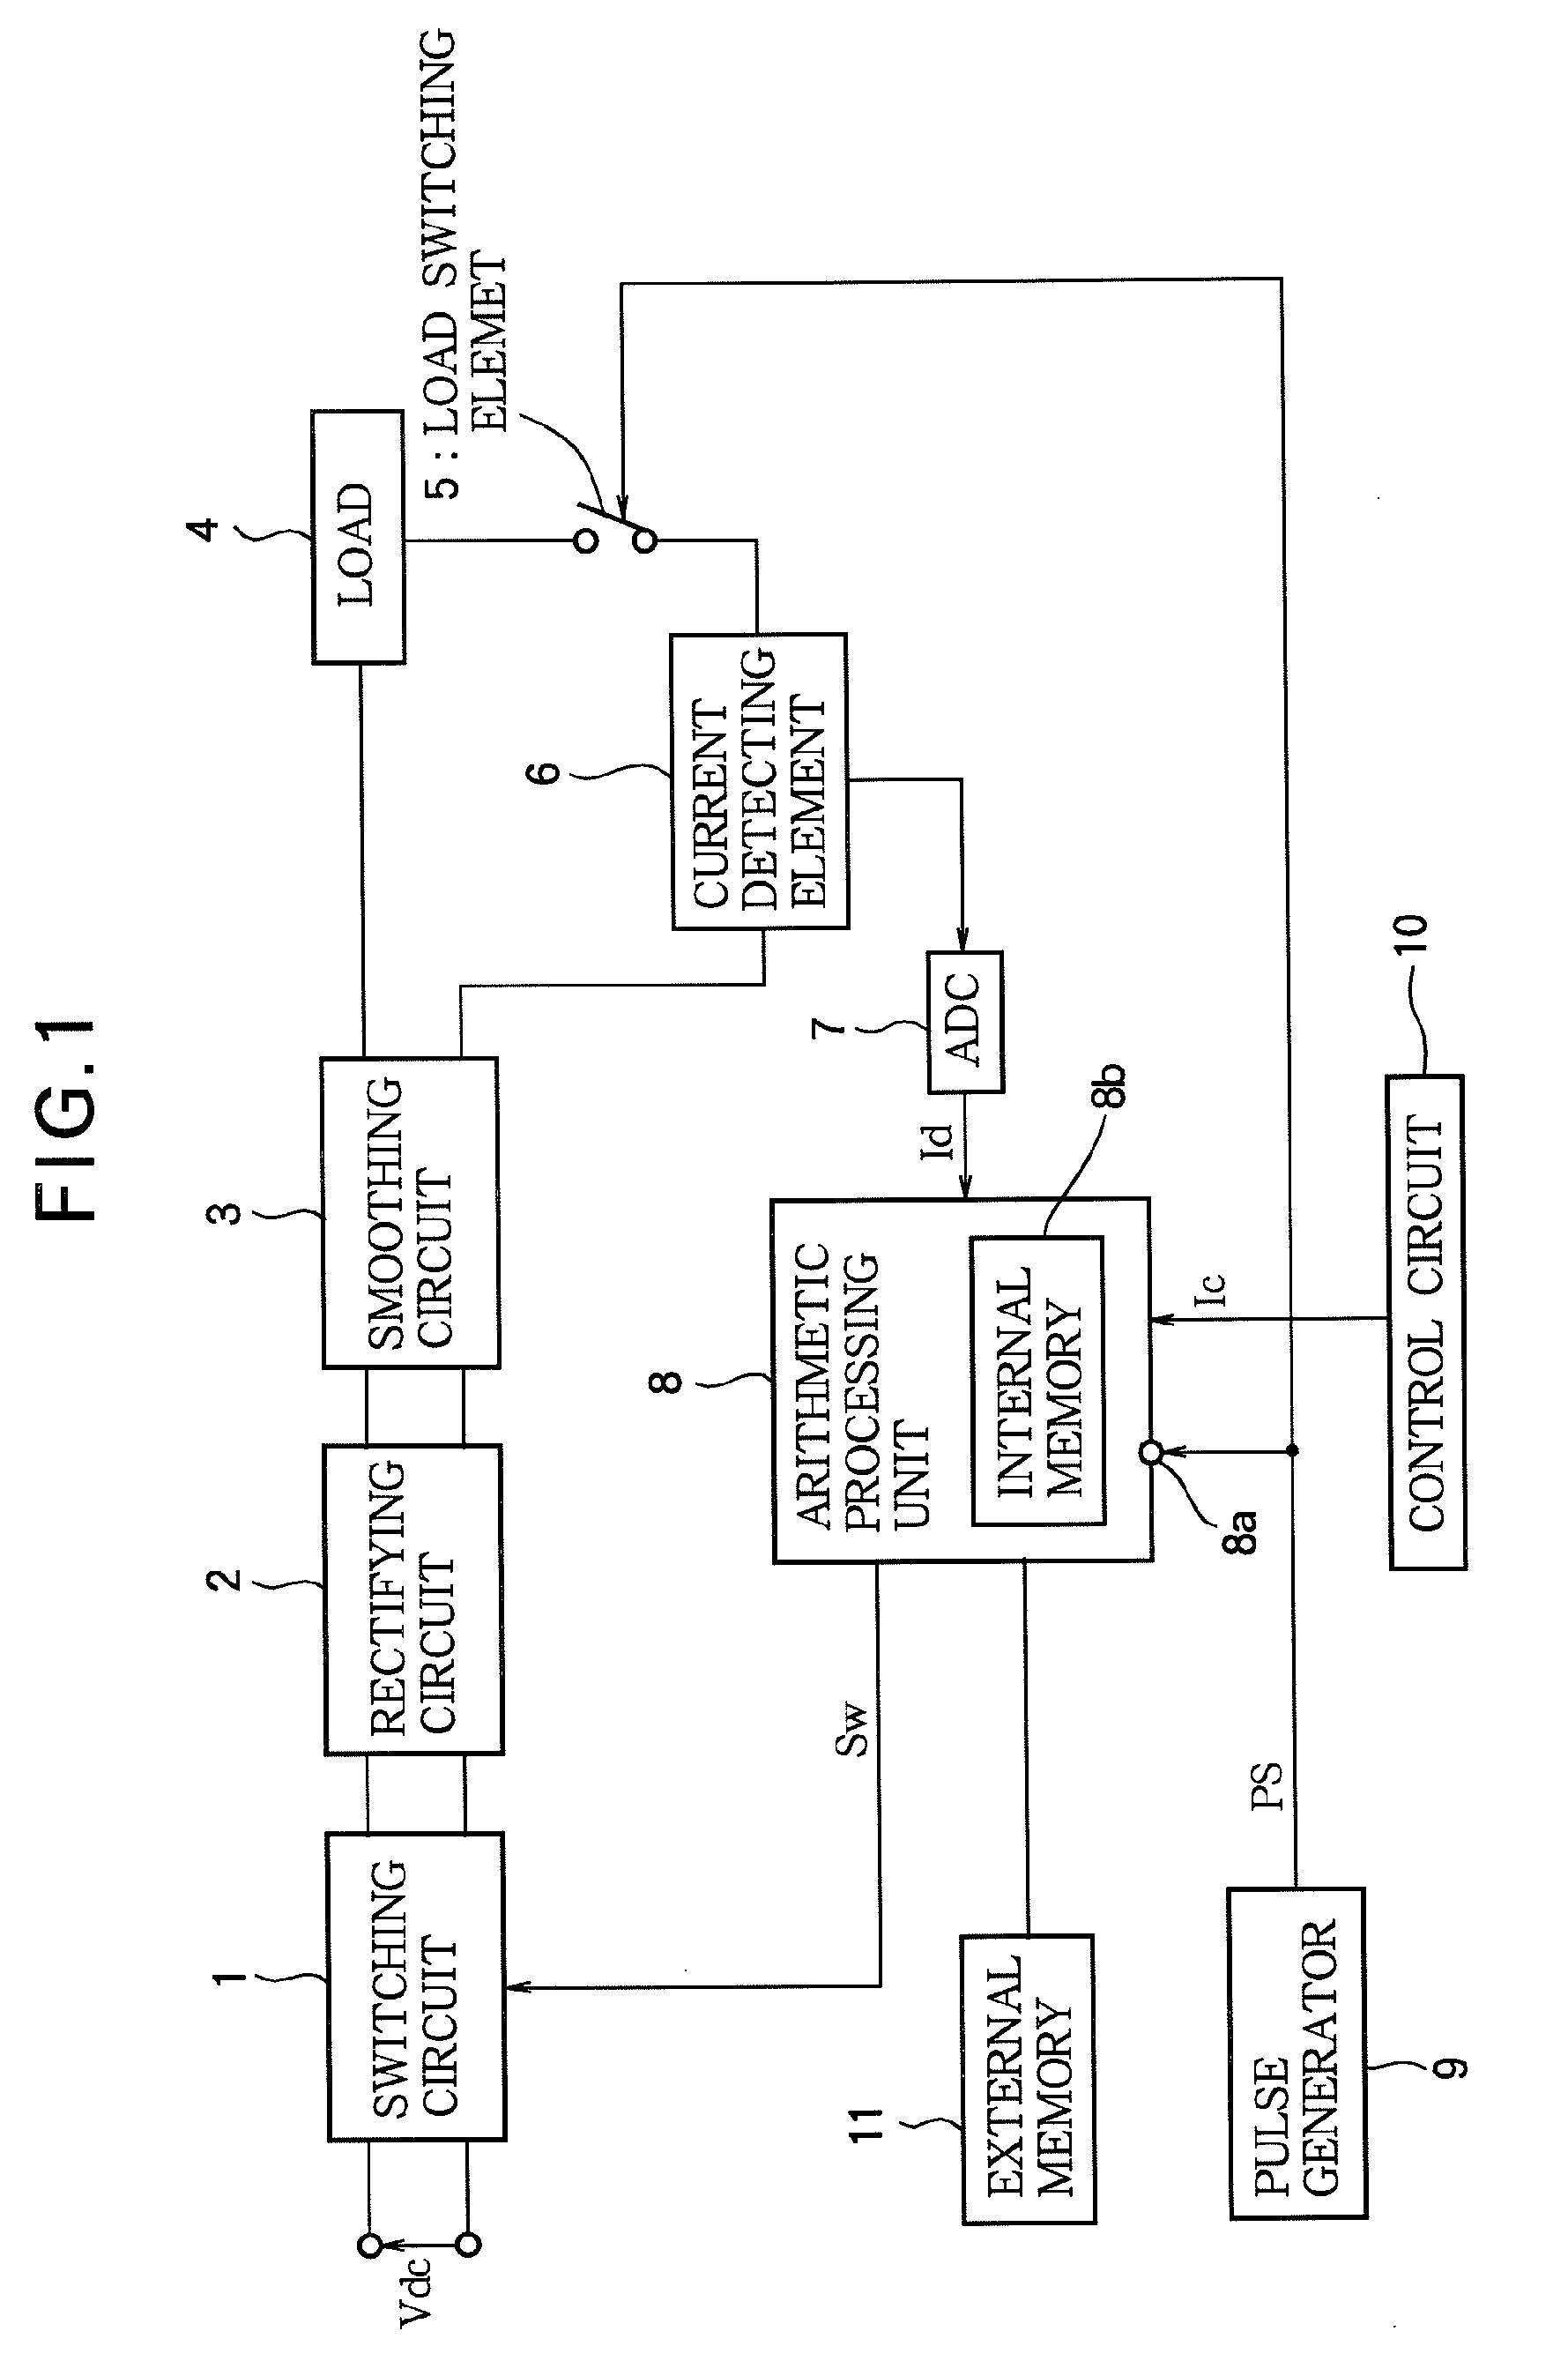 Constant current switching power supply apparatus, method of driving it, light source driving apparatus, method of driving it, and image display apparatus